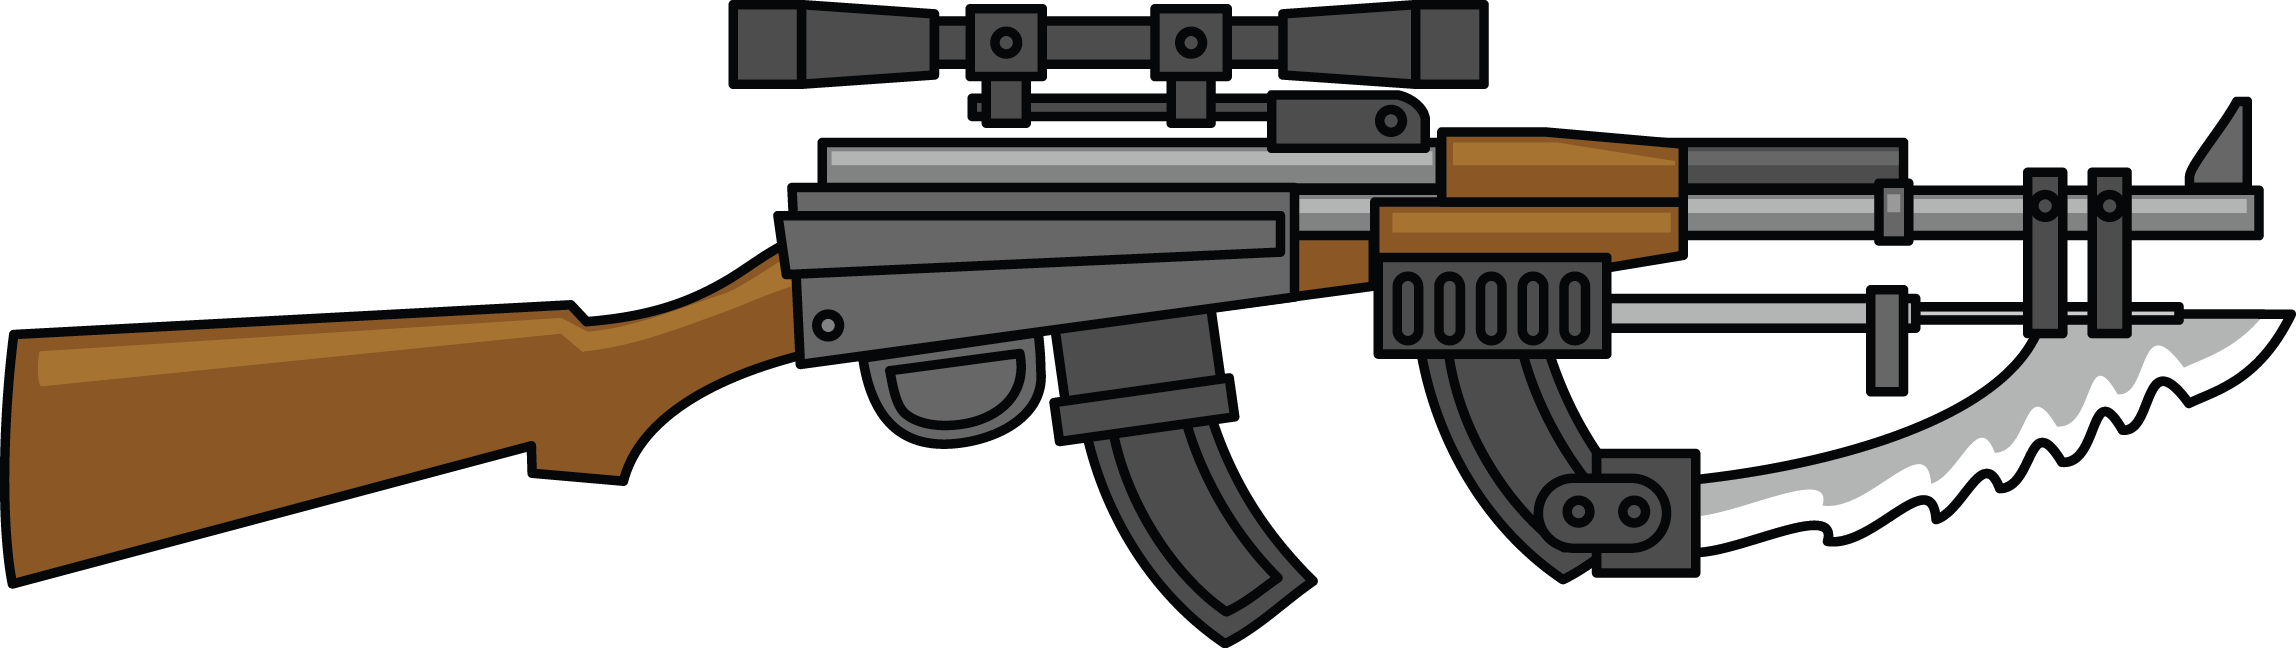 Clip Arts Related To : assault rifle outline png. view all Military Rifle C...